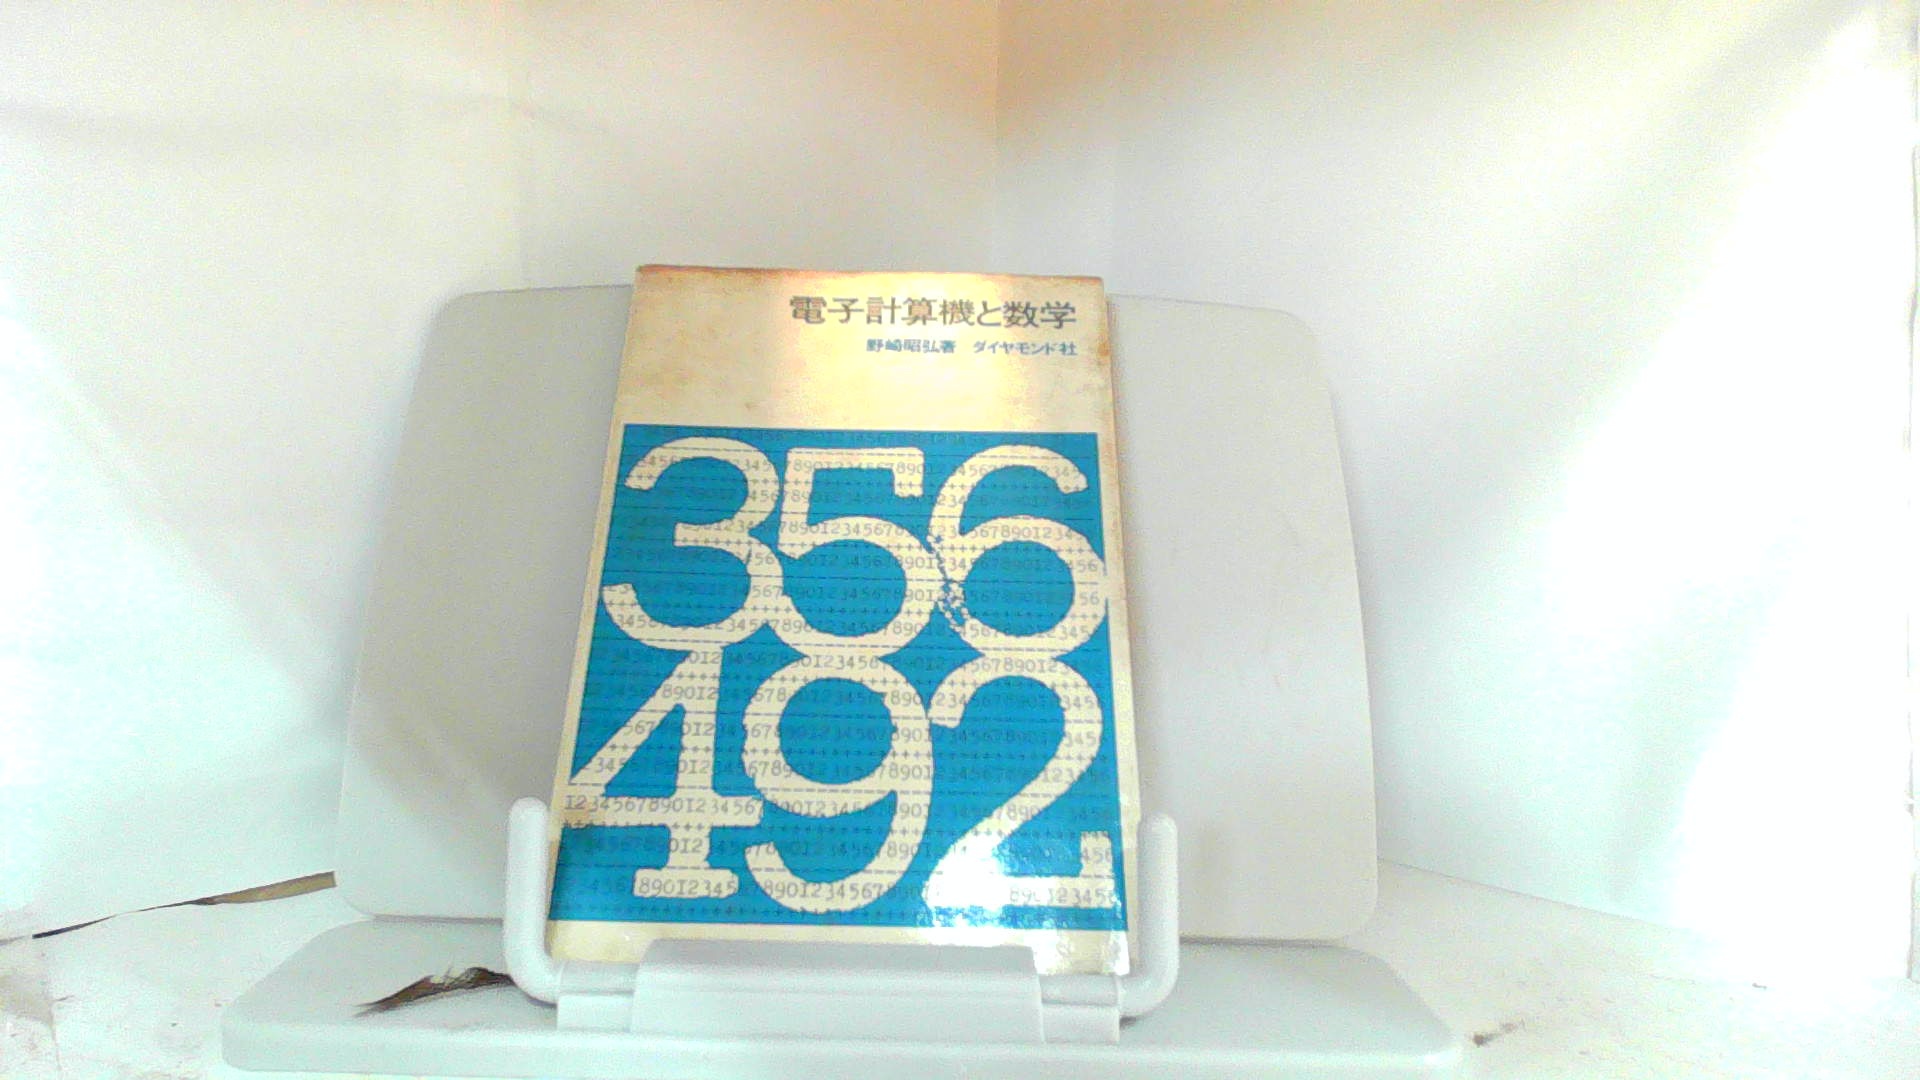  electron count machine . mathematics 1965 year 4 month 15 day issue 